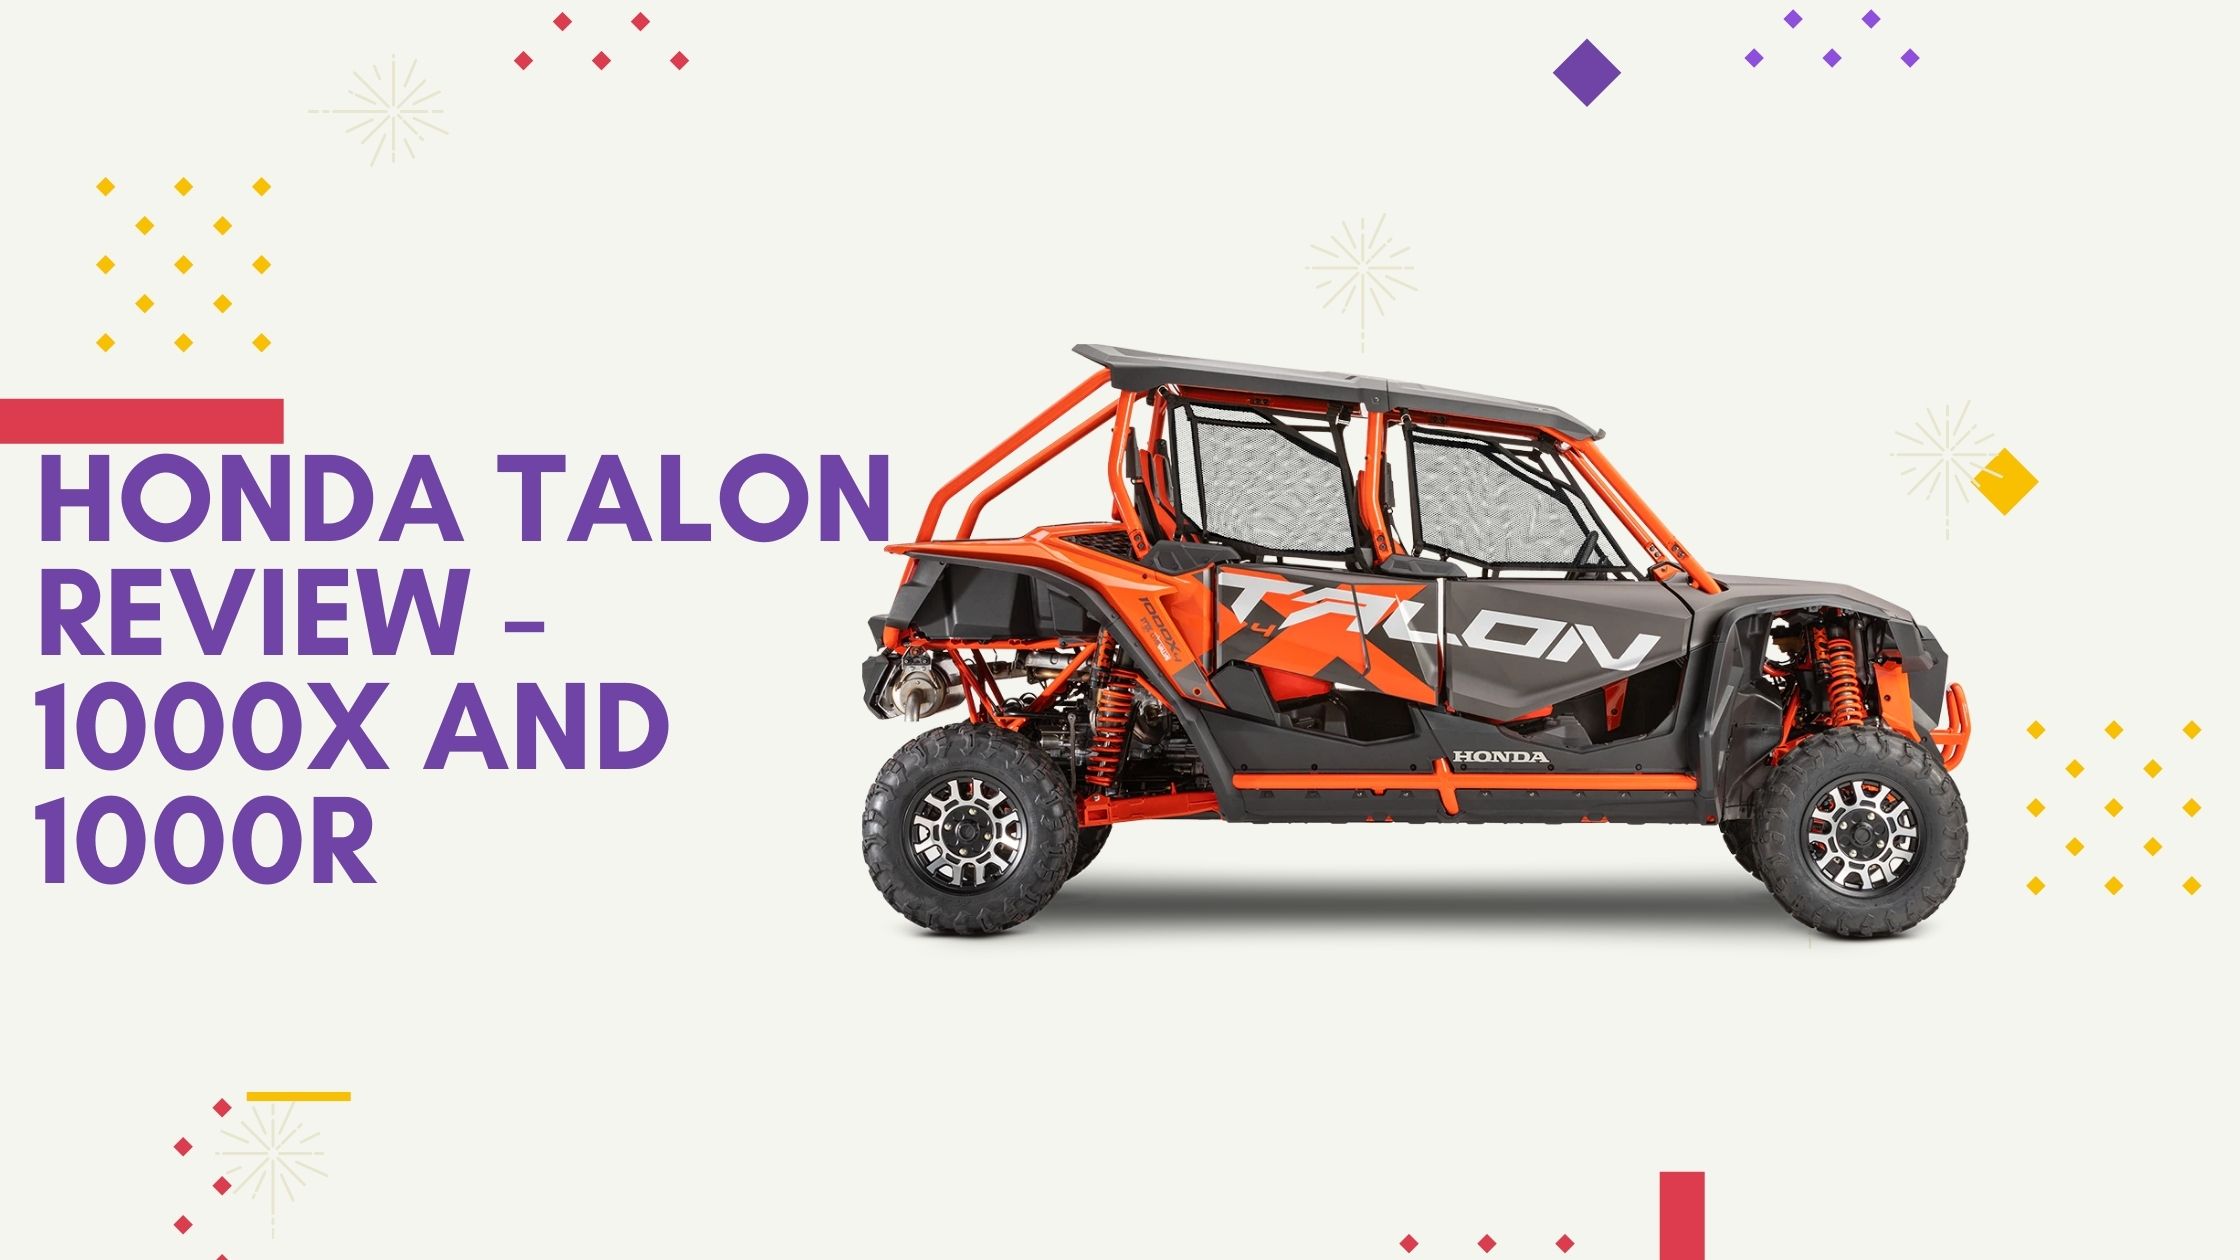 Honda Talon Review - 1000x and 1000R Top Speed